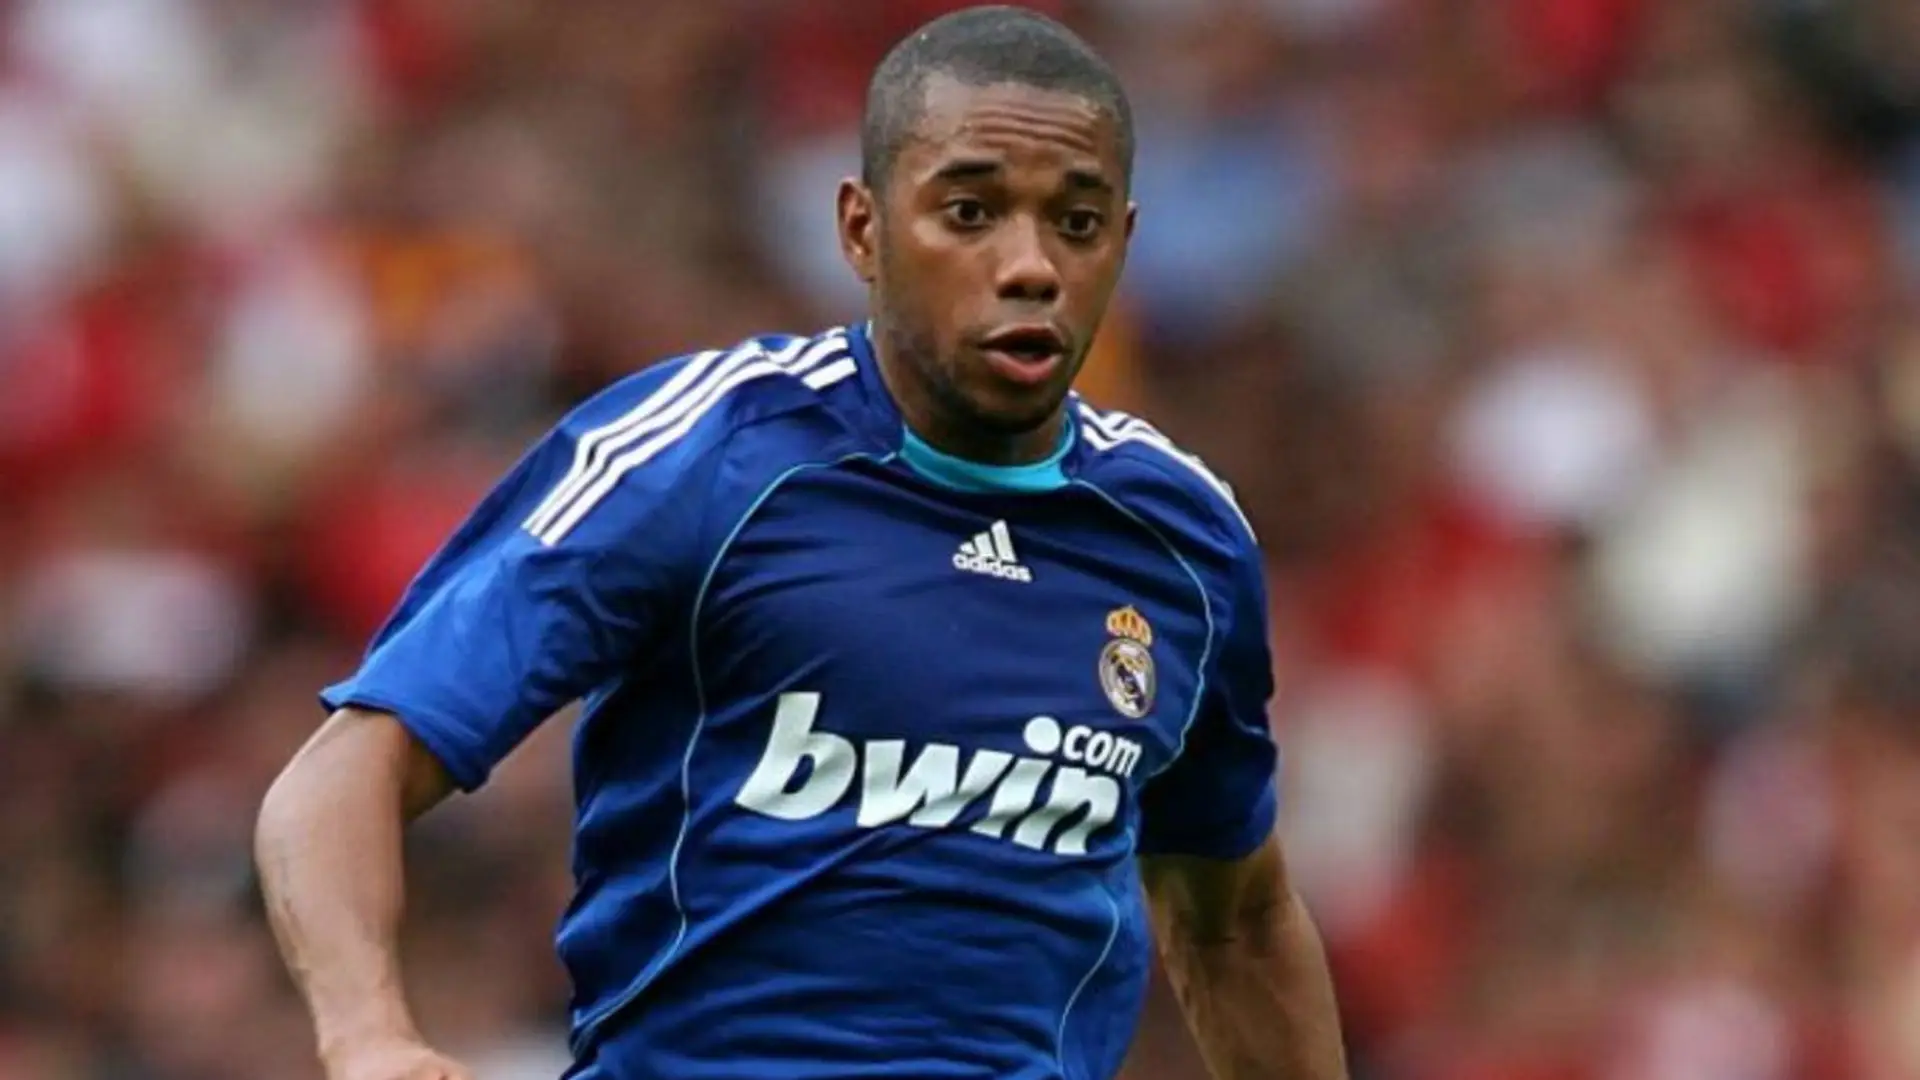 'Chelsea sold shirts with my name on them before the deal was done': Robinho lifts lid on failed Chelsea move from Madrid